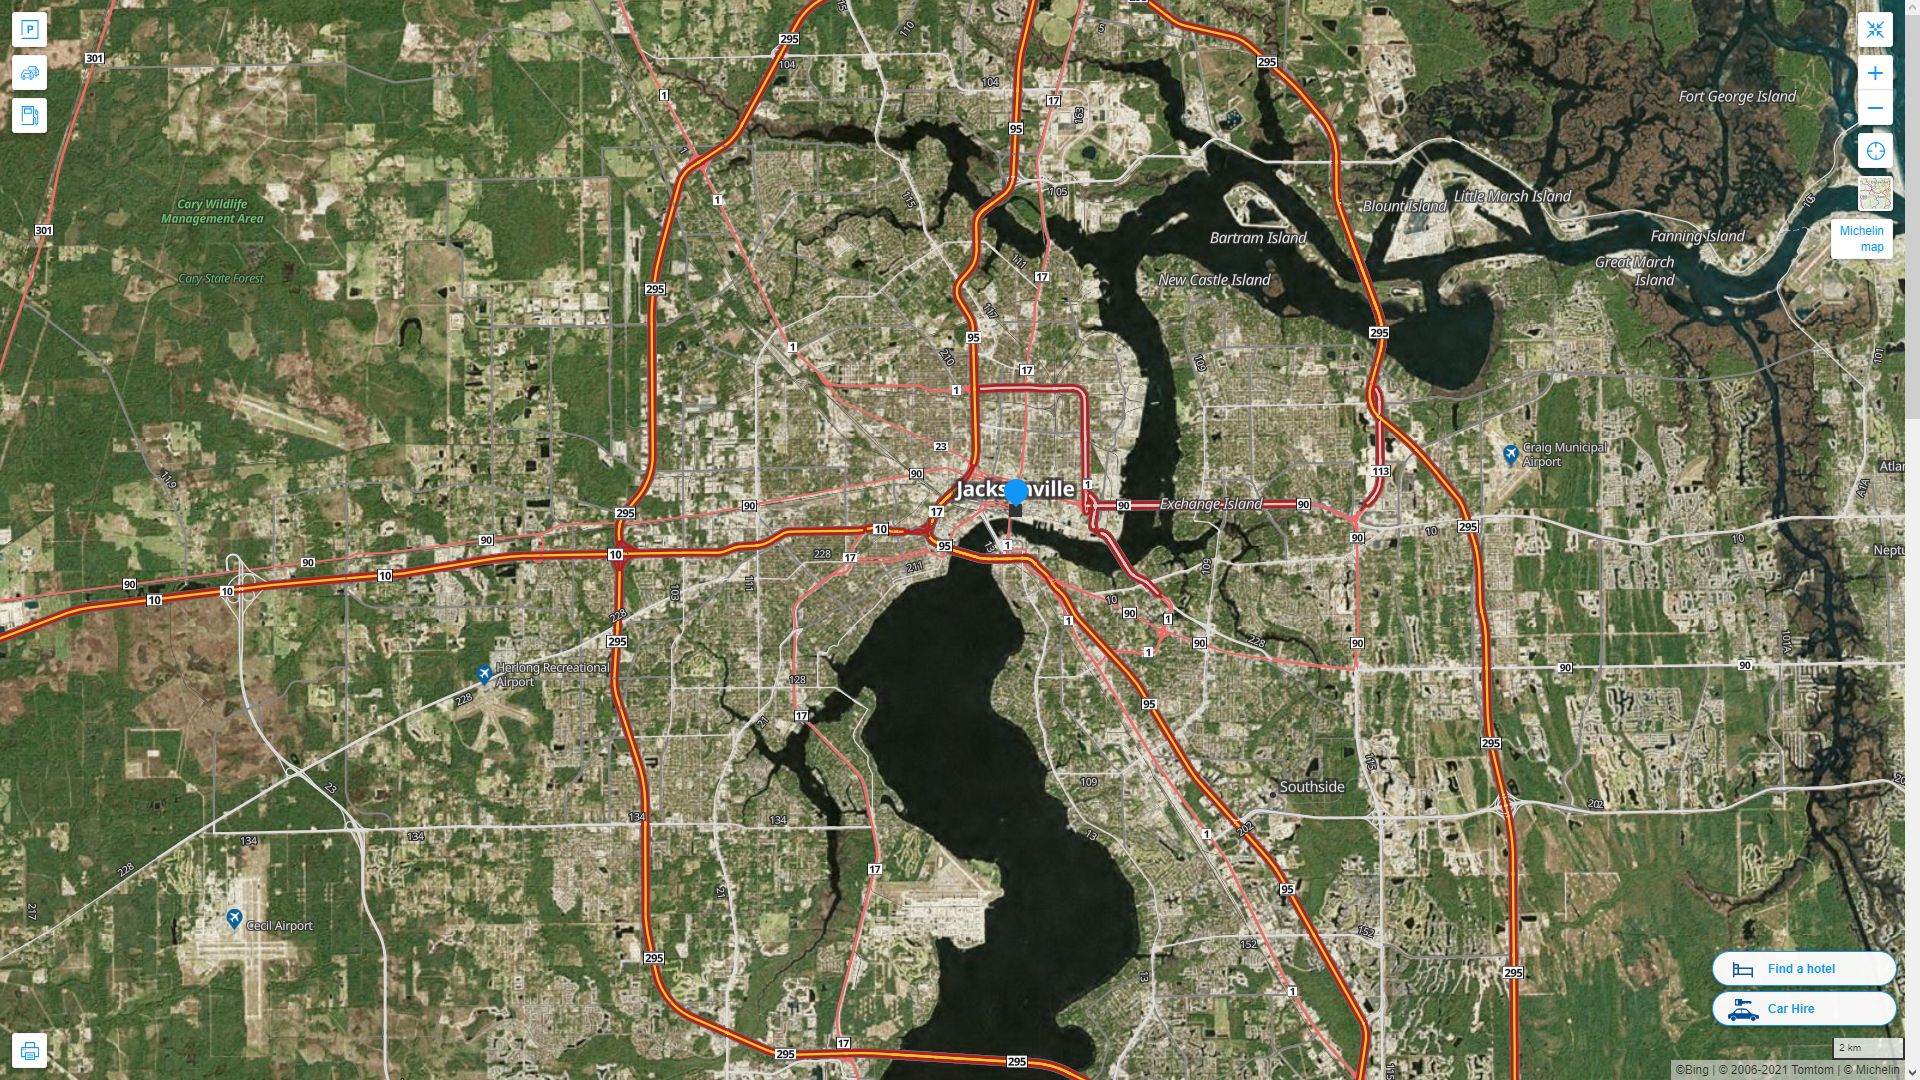 Jacksonville Florida Highway and Road Map with Satellite View